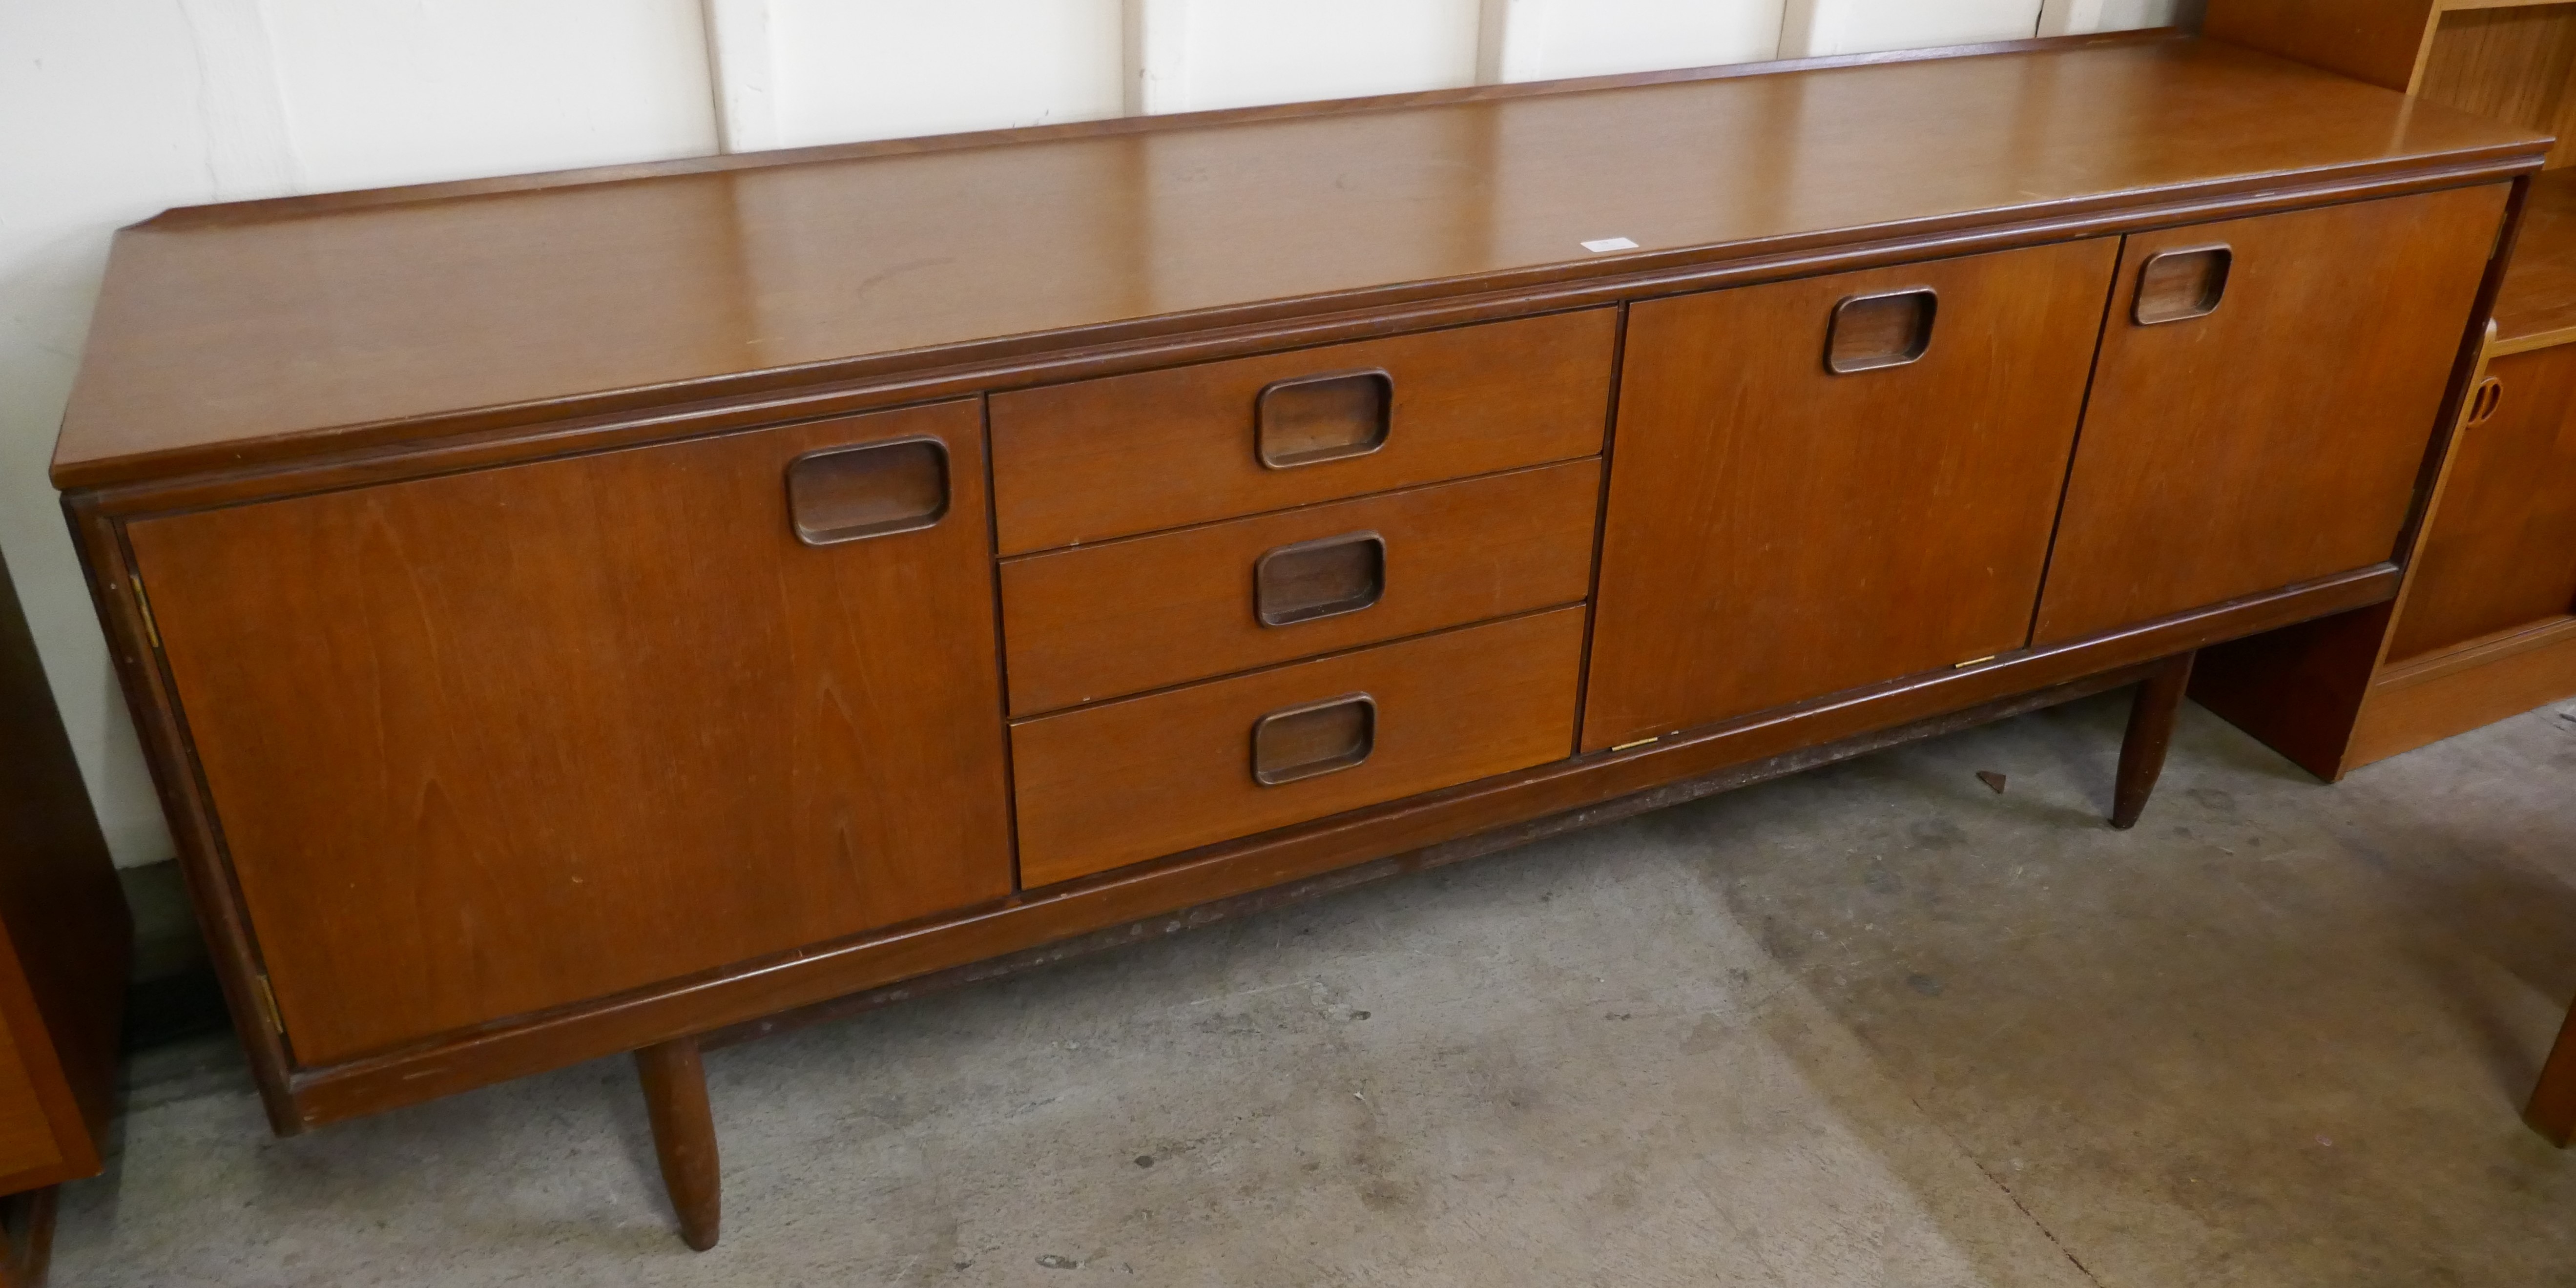 A William Lawrence teak sideboard - Image 2 of 2